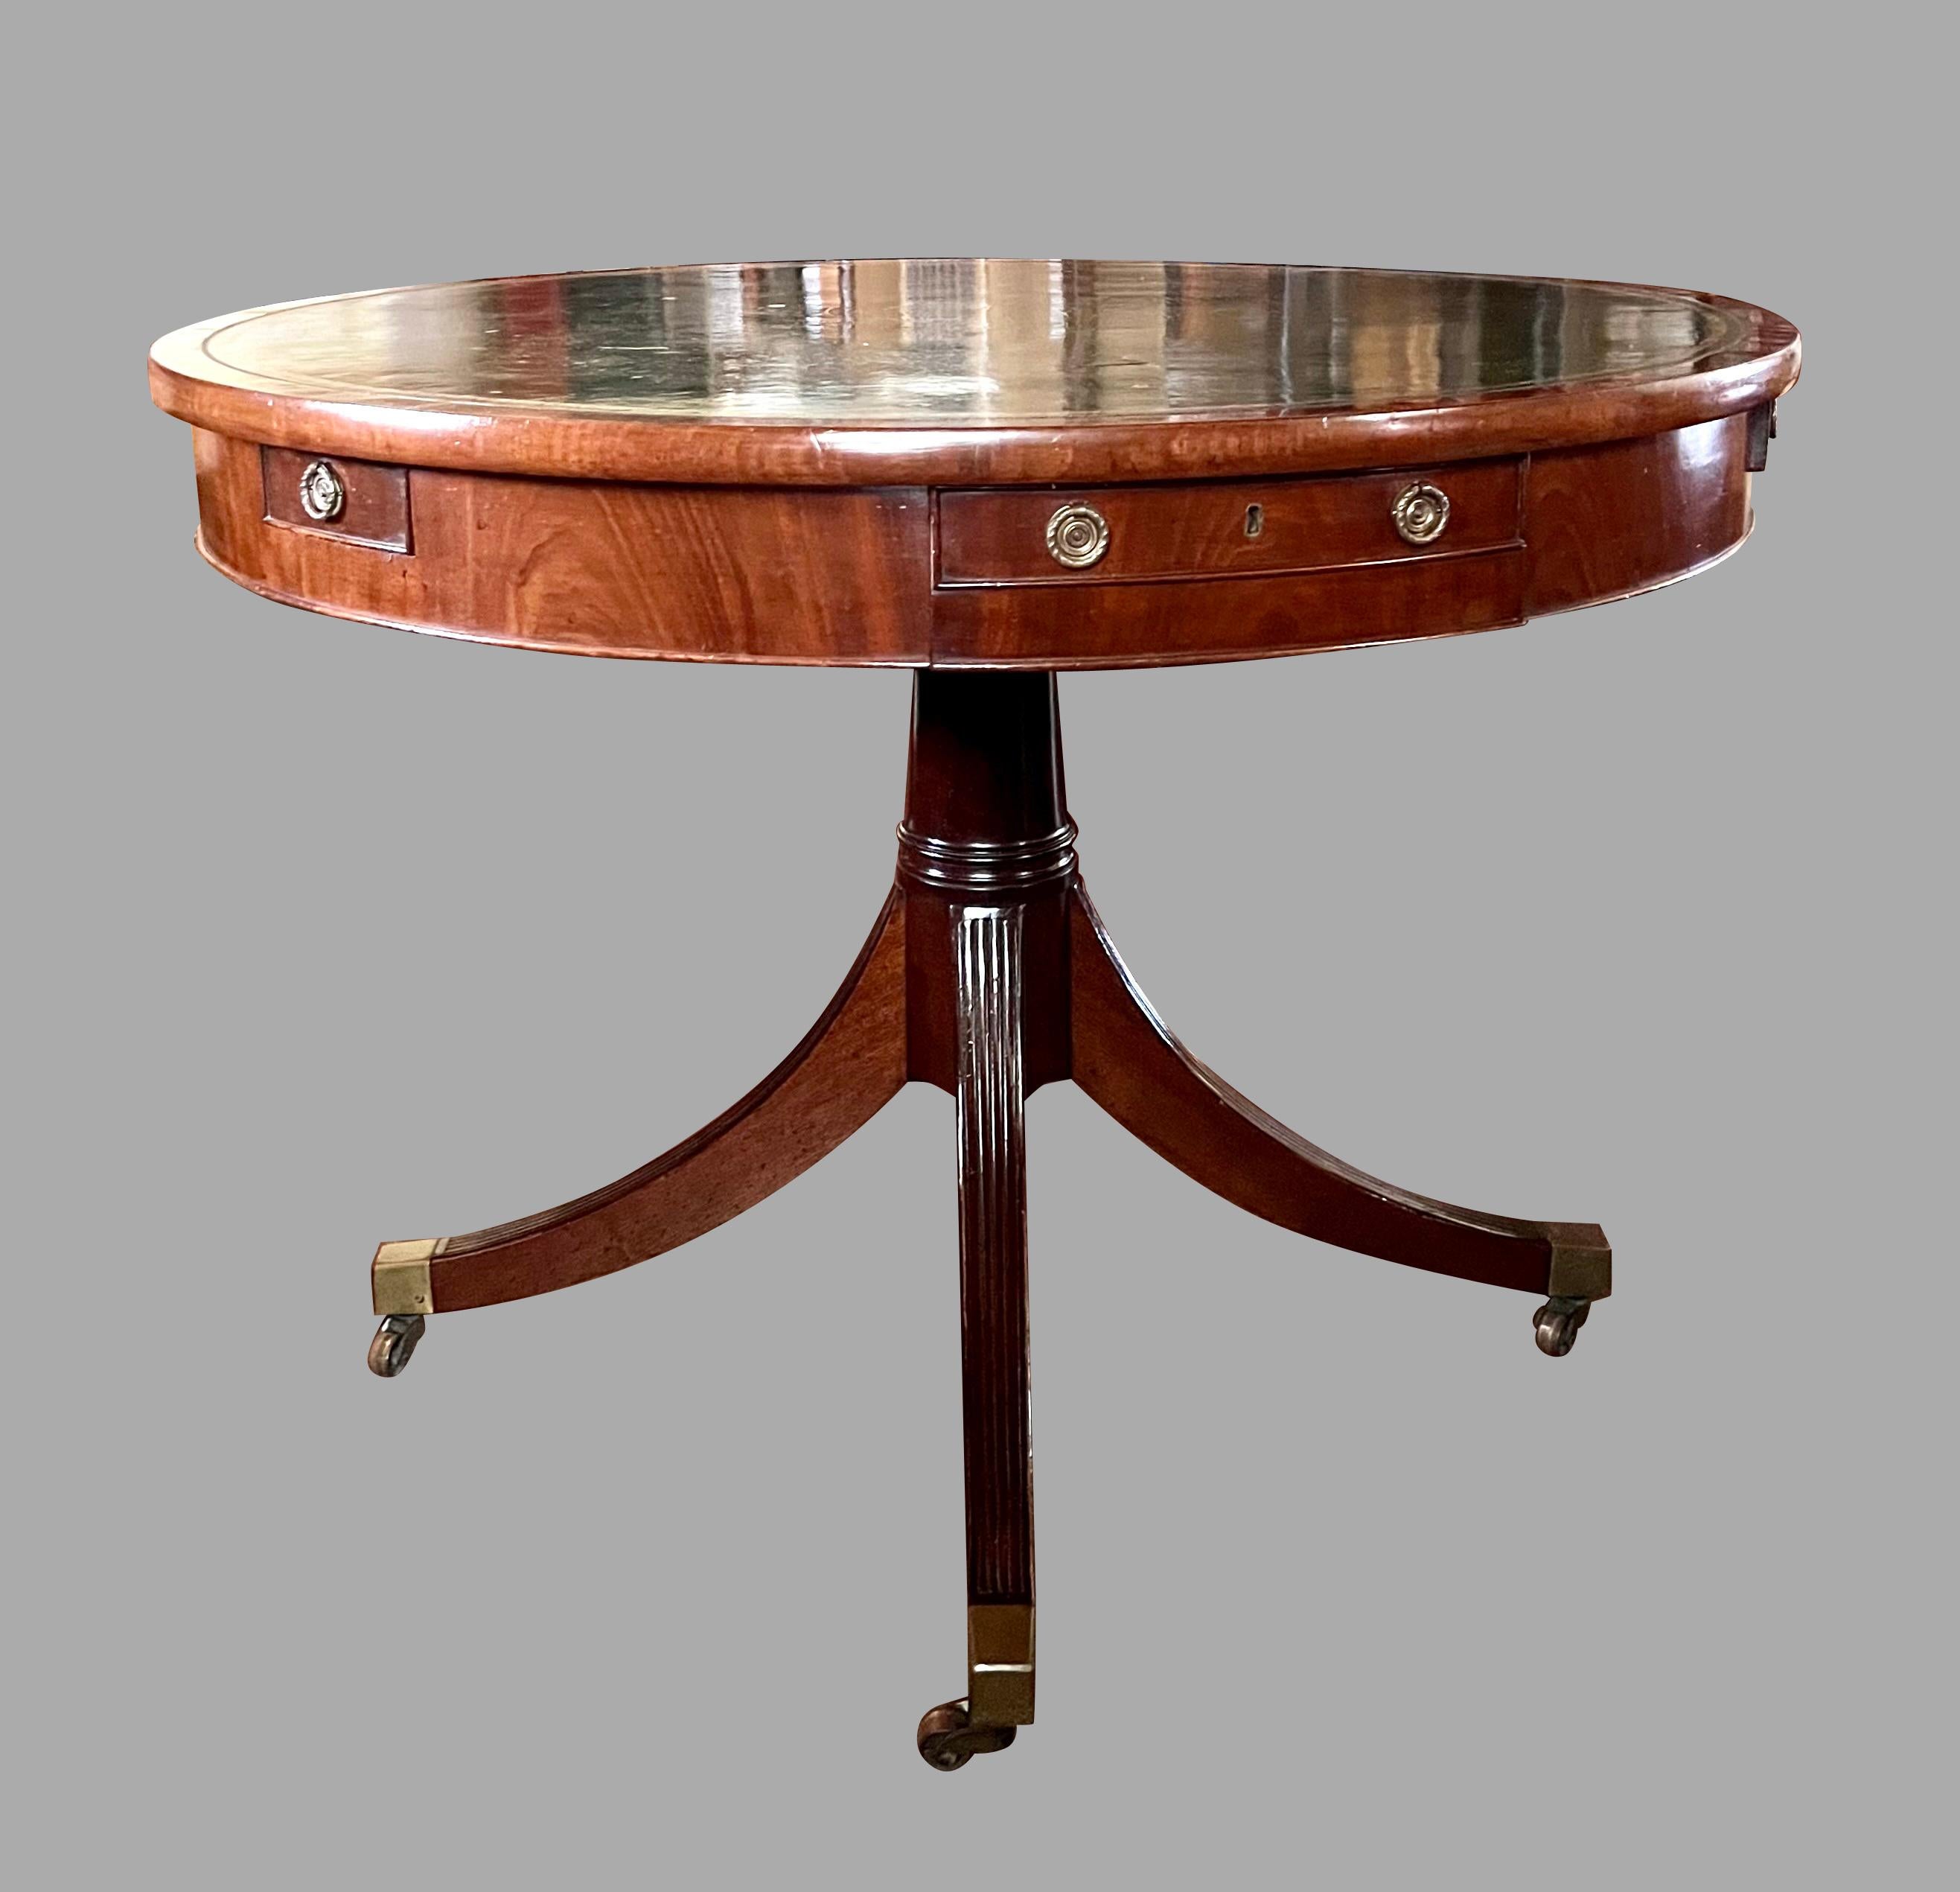 An English Regency style mahogany drum table, the green gilt-tooled leather top above 4 functional drawers, including a divided coin drawer, resting on a reeded quadripartite base ending in brass casters. The top has a slot which was designed to